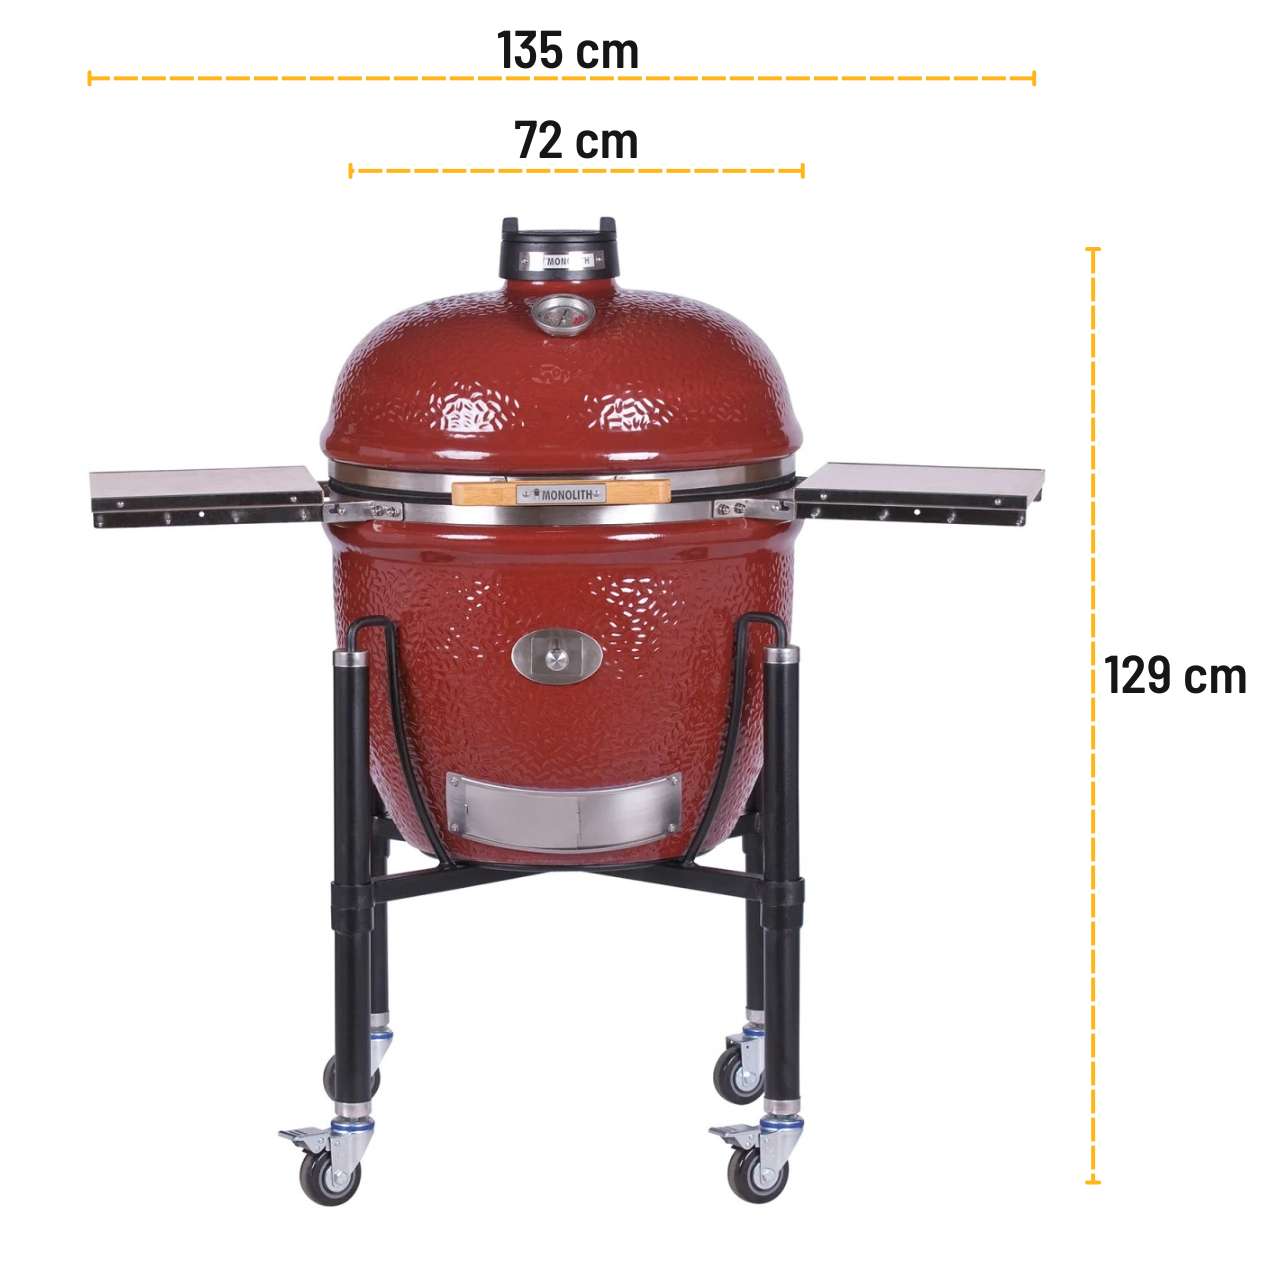 Monolith Kamado Grill LeChef Pro-Serie 2.0 – RED mit Gestell, 55 cm Edelstahlrost, Glasfaserdichtung, Smart Grid System